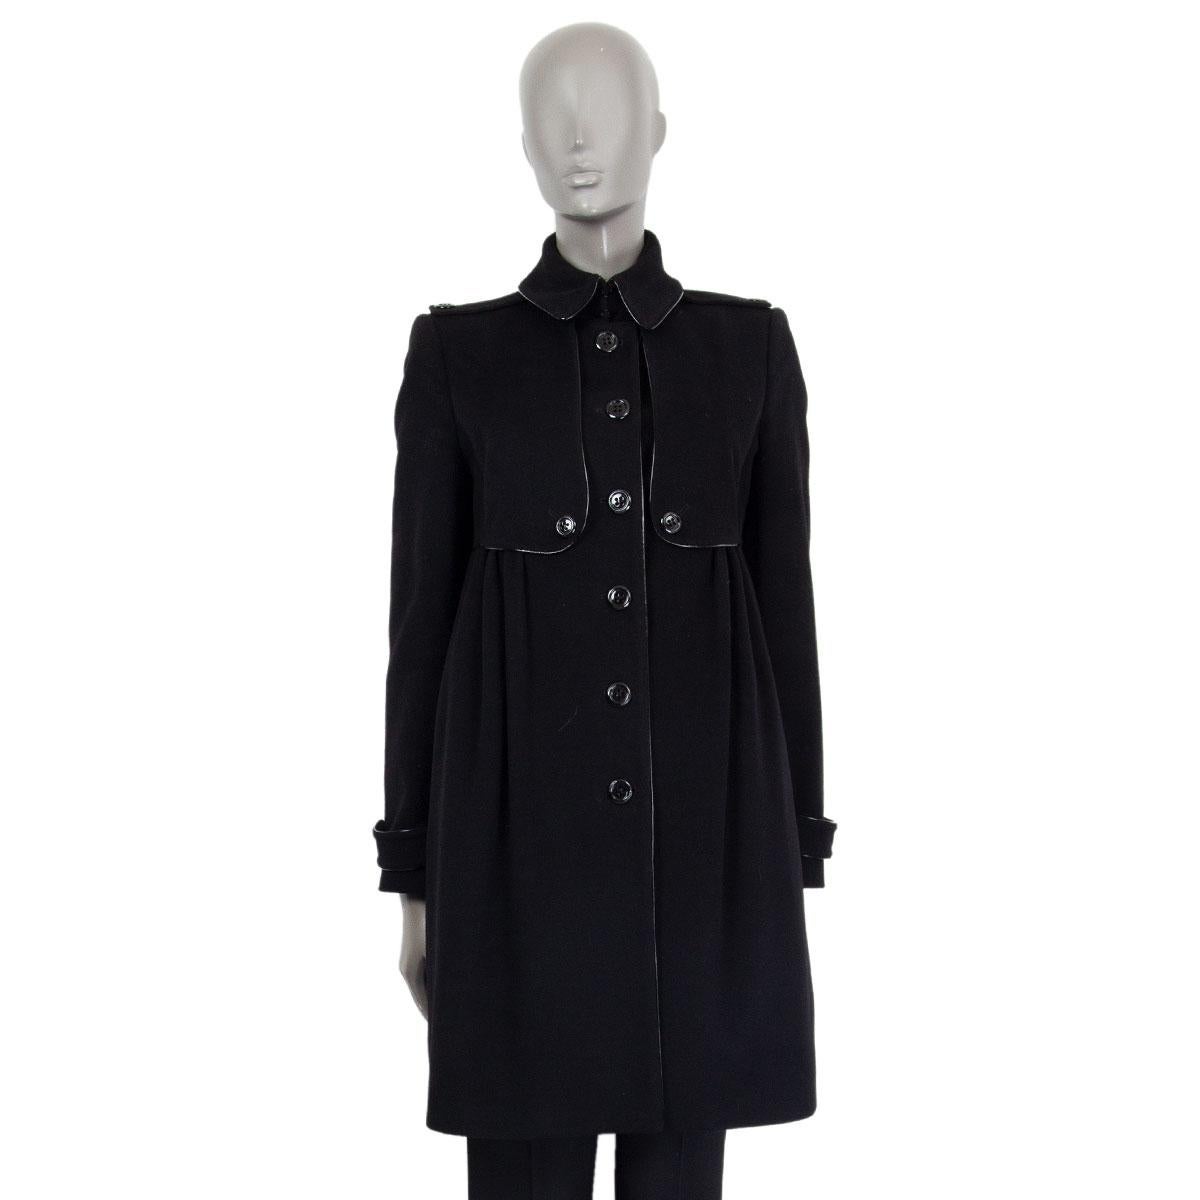 Burberry London patent trim detail coat in wool (85%) and cashmere (15%) with epaulettes on the shoulders. Opens with one hook and buttons on the front. Has slit pockets on the side. Lined in viscose (50%) and cupro (50%). Has been worn and is in